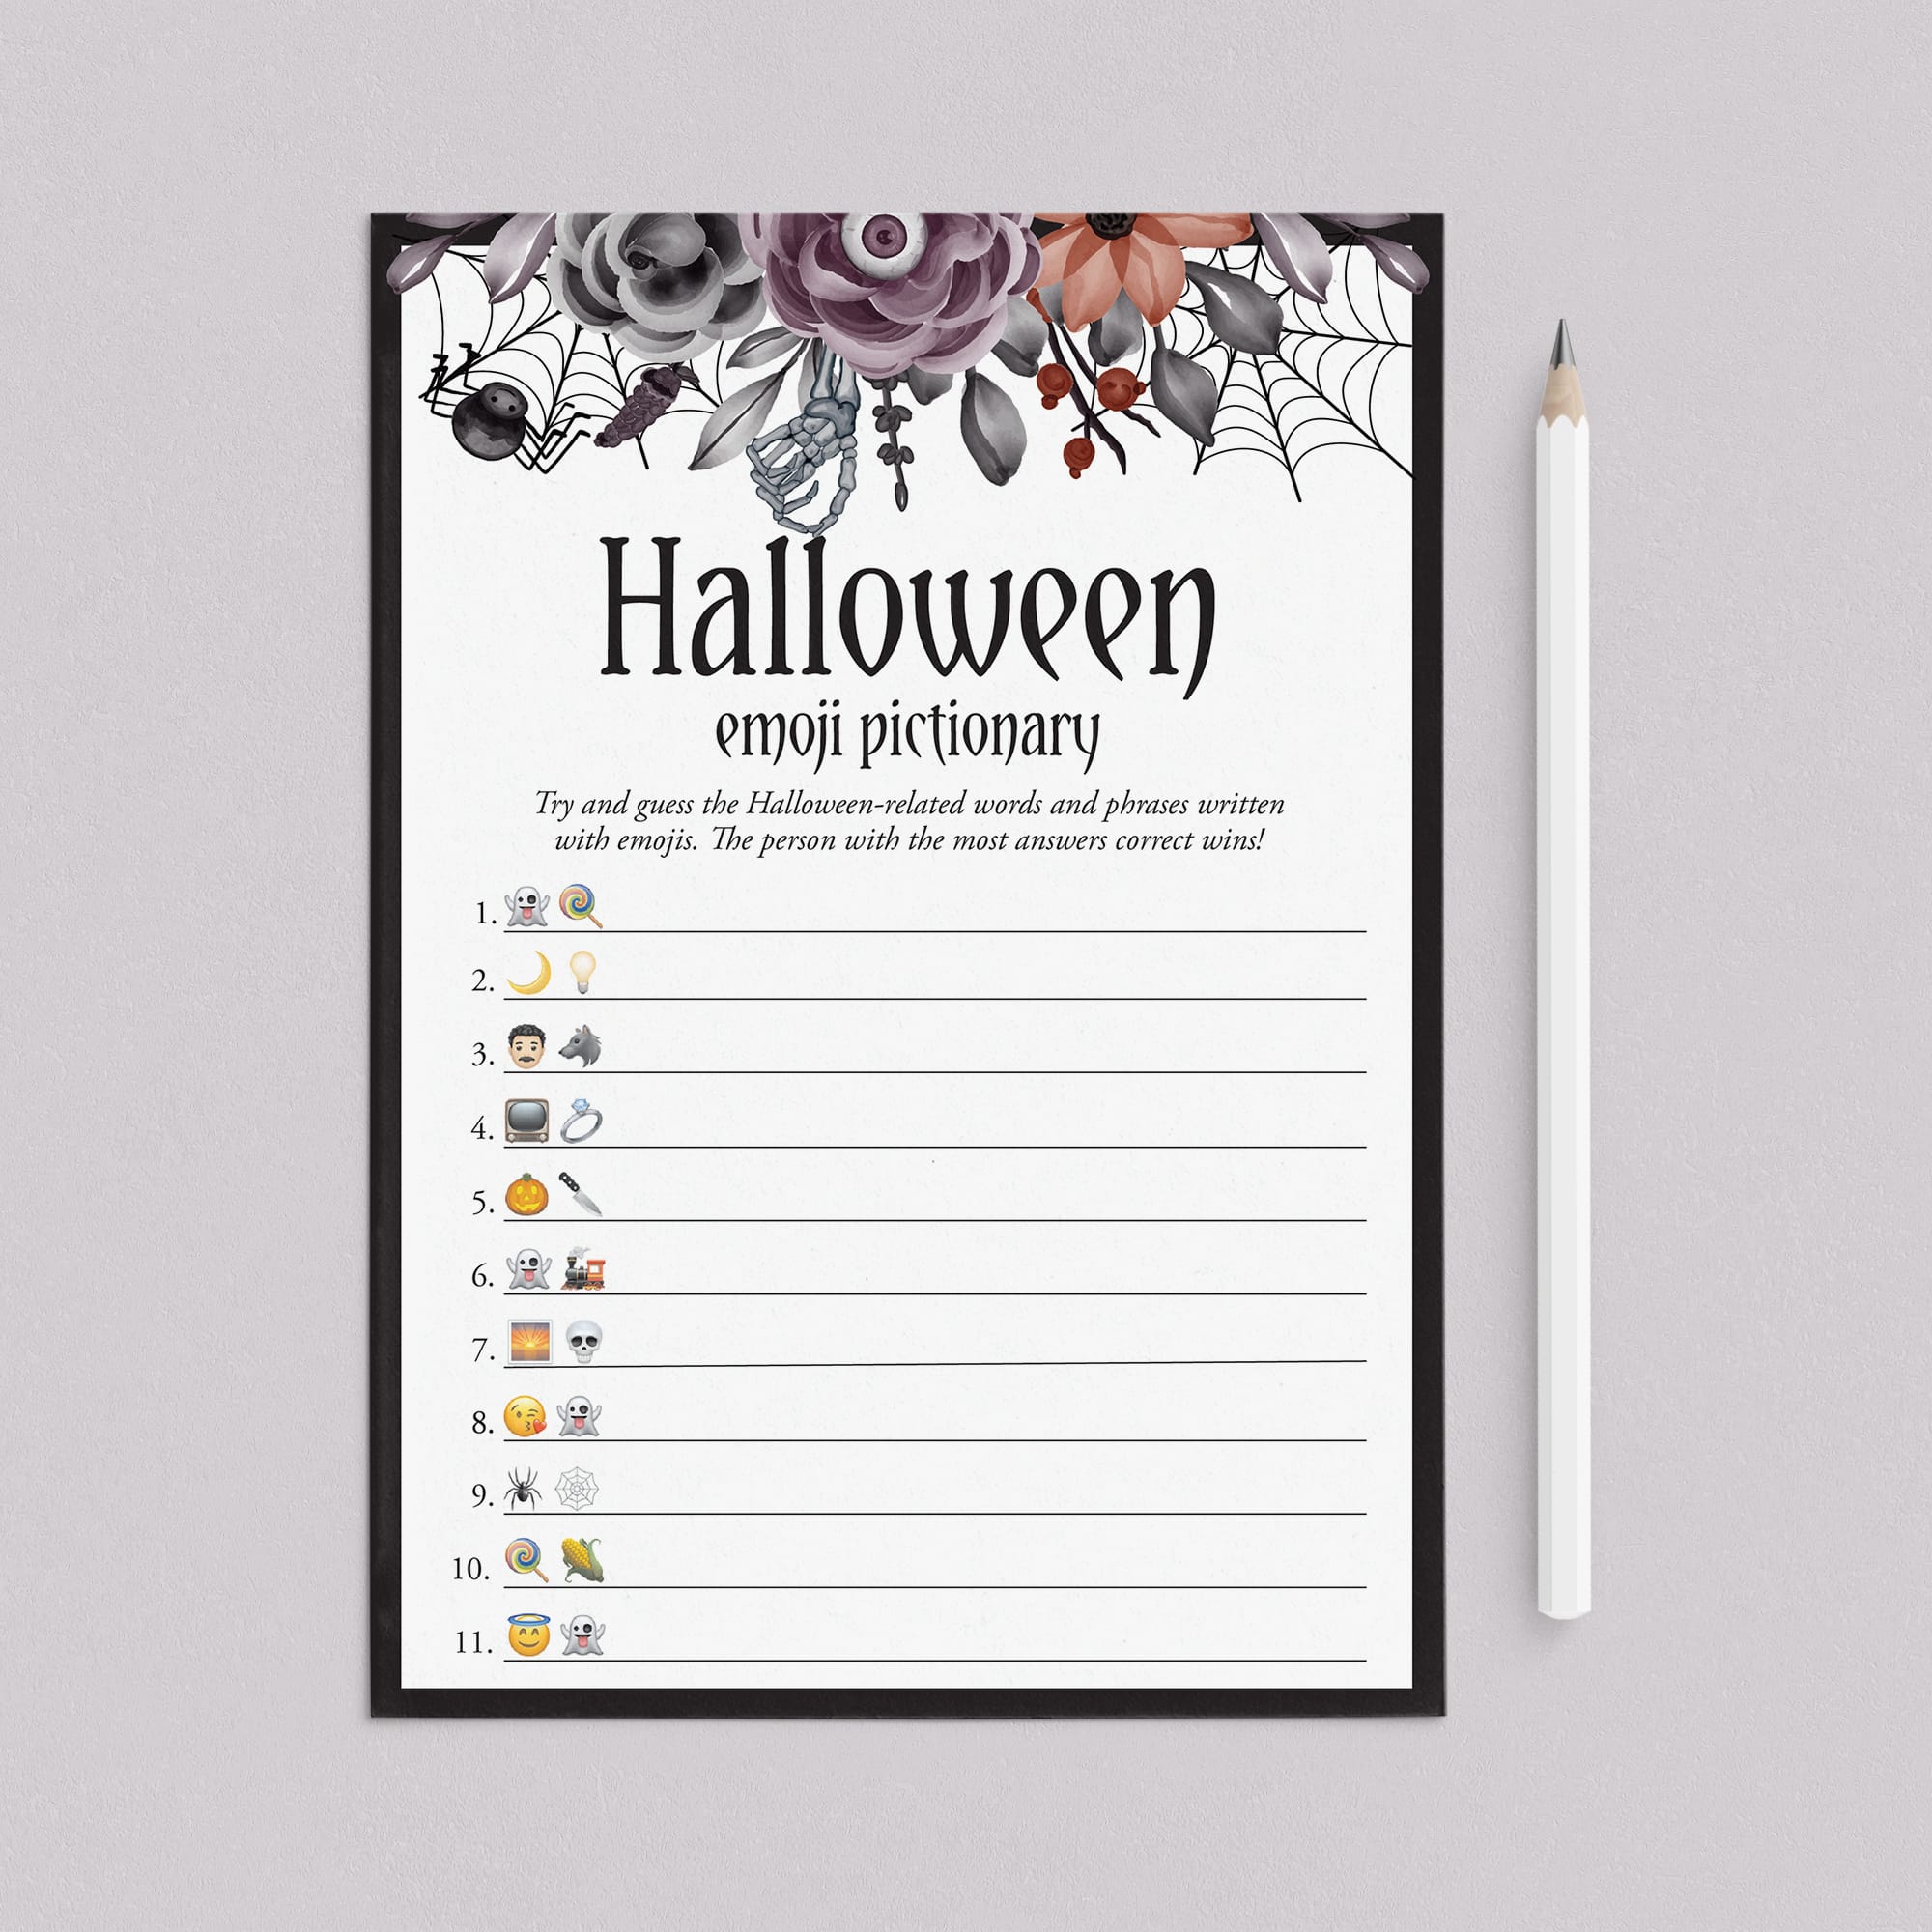 Halloween Theme Dinner Party Game Emoji Pictionary by LittleSizzle